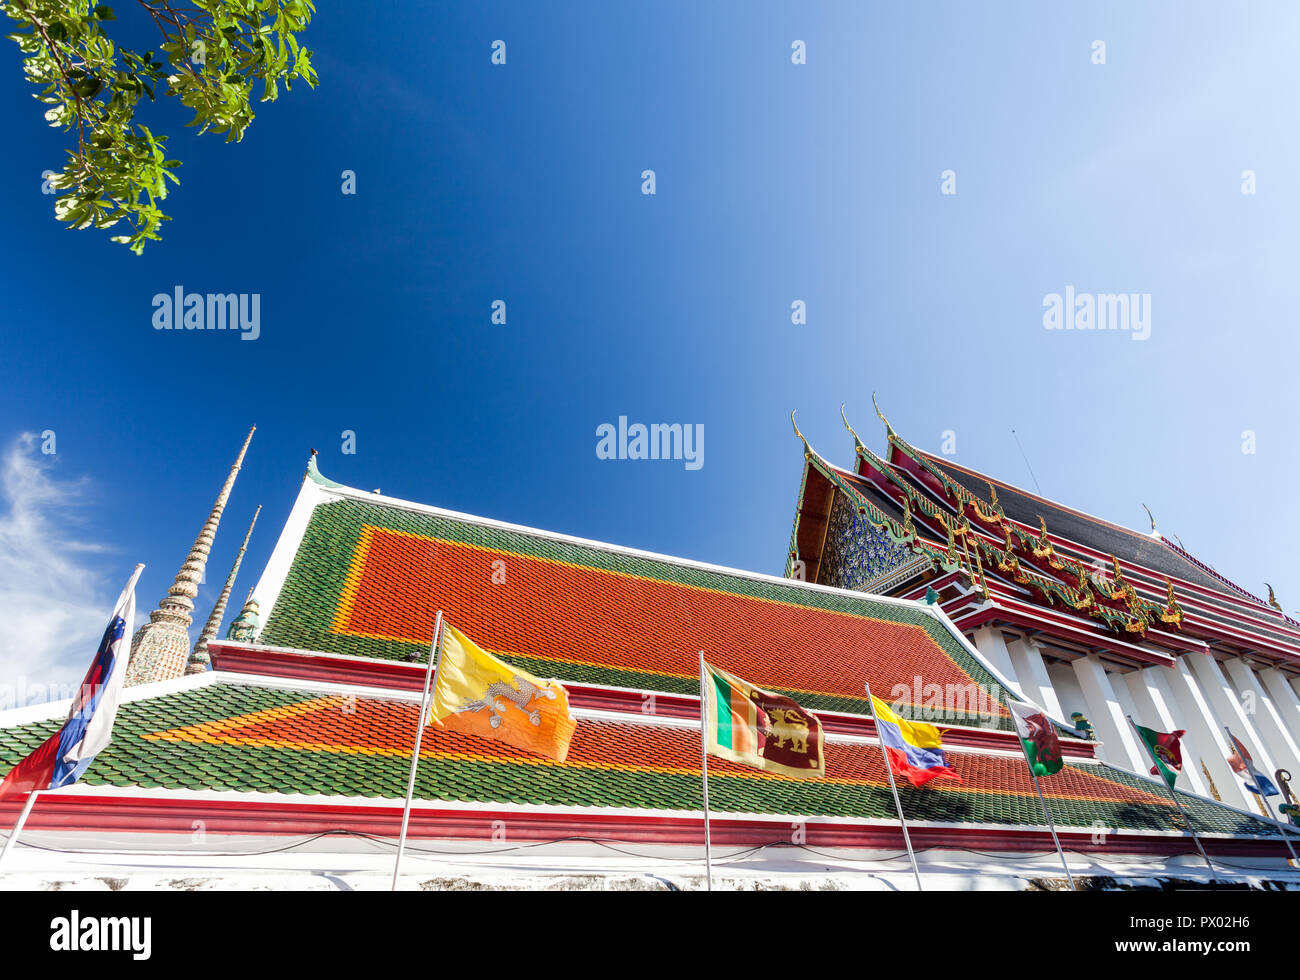 Roof of Wat Pho temple in Bangkok, Thailand Stock Photo